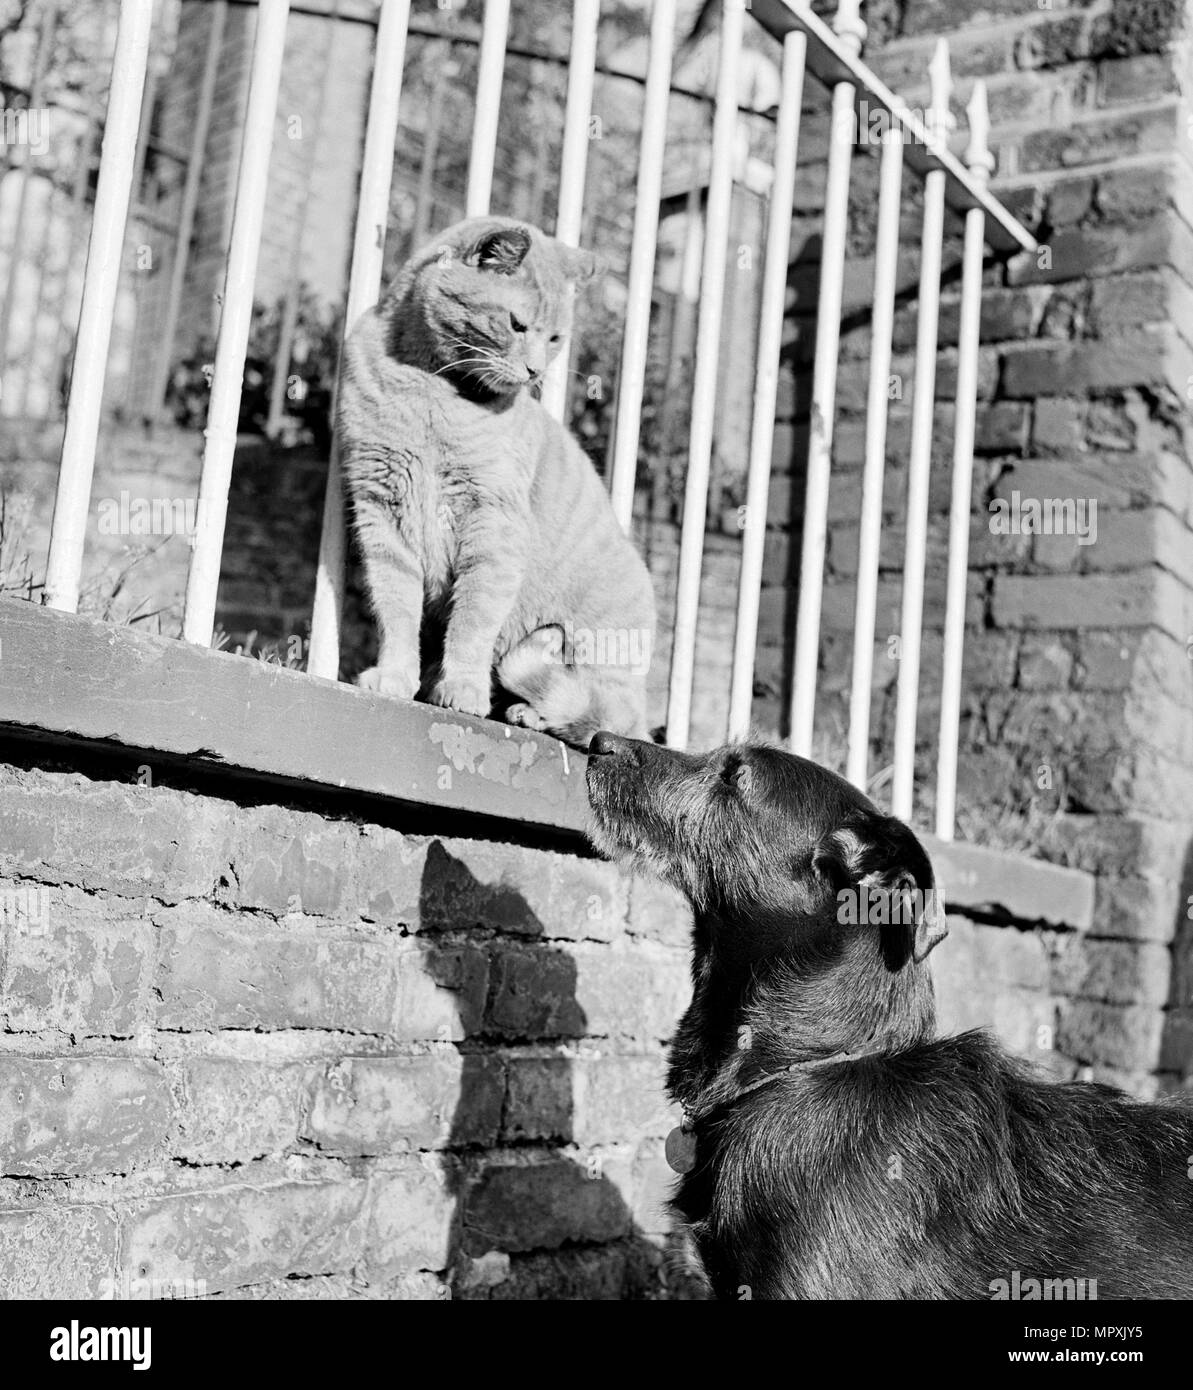 Cat and dog, late 1950s or early 1960s. Artist: John Gay. Stock Photo